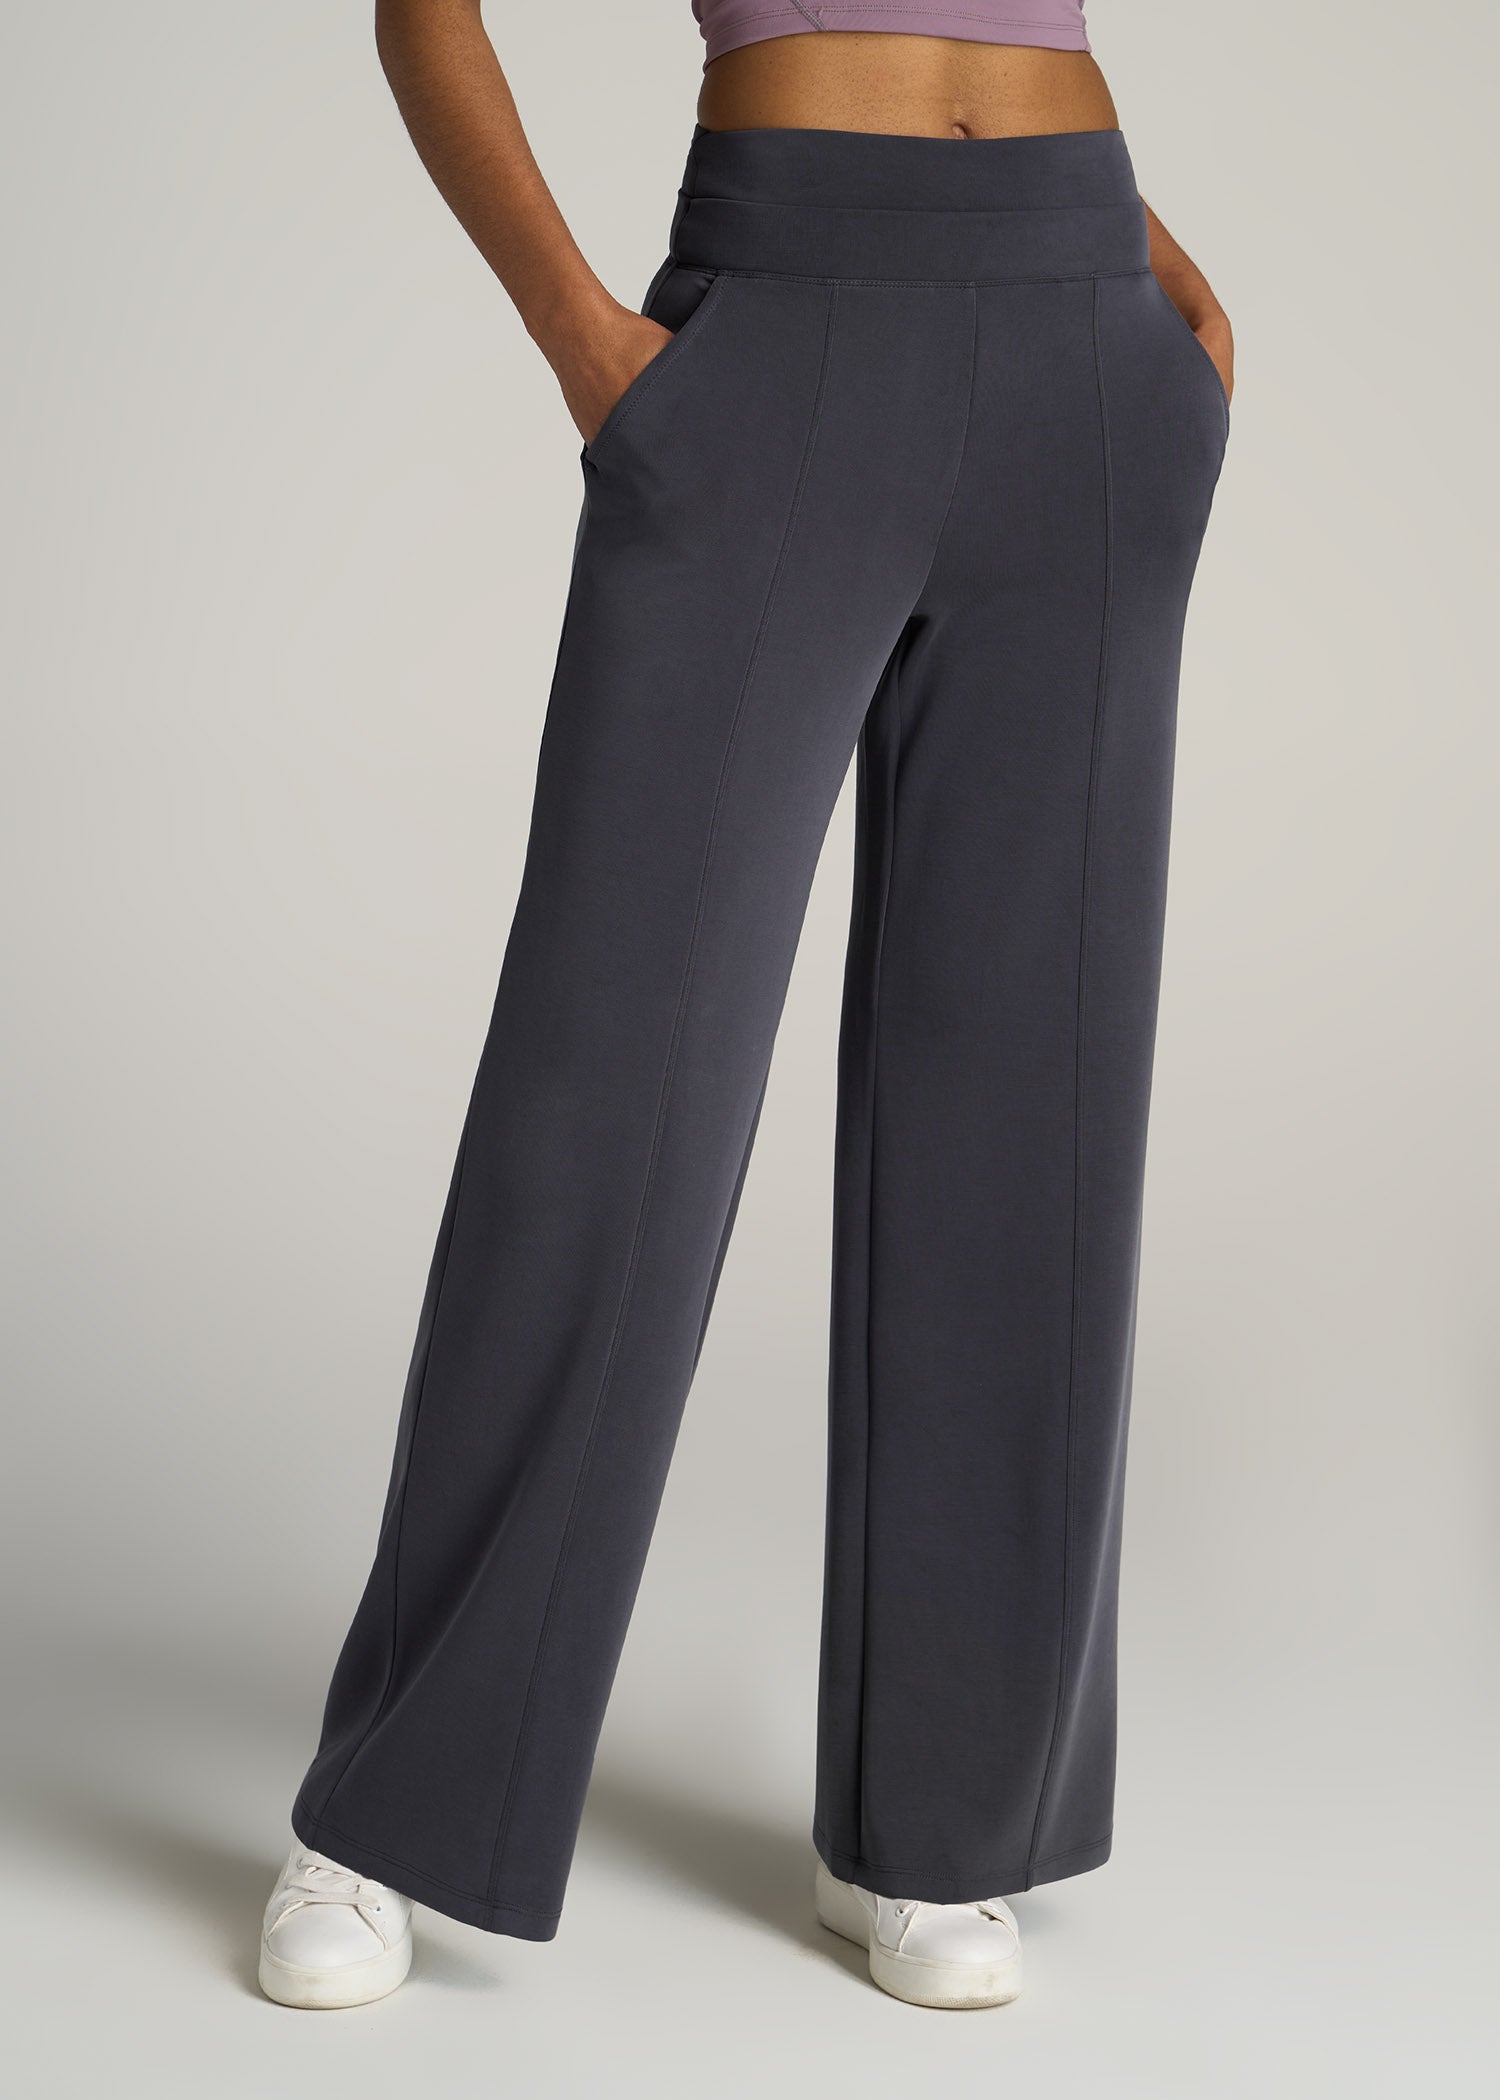 American-Tall-Women-Wide-Leg-Ultra-High-Rise-Pant-Charcoal-Rinse-front